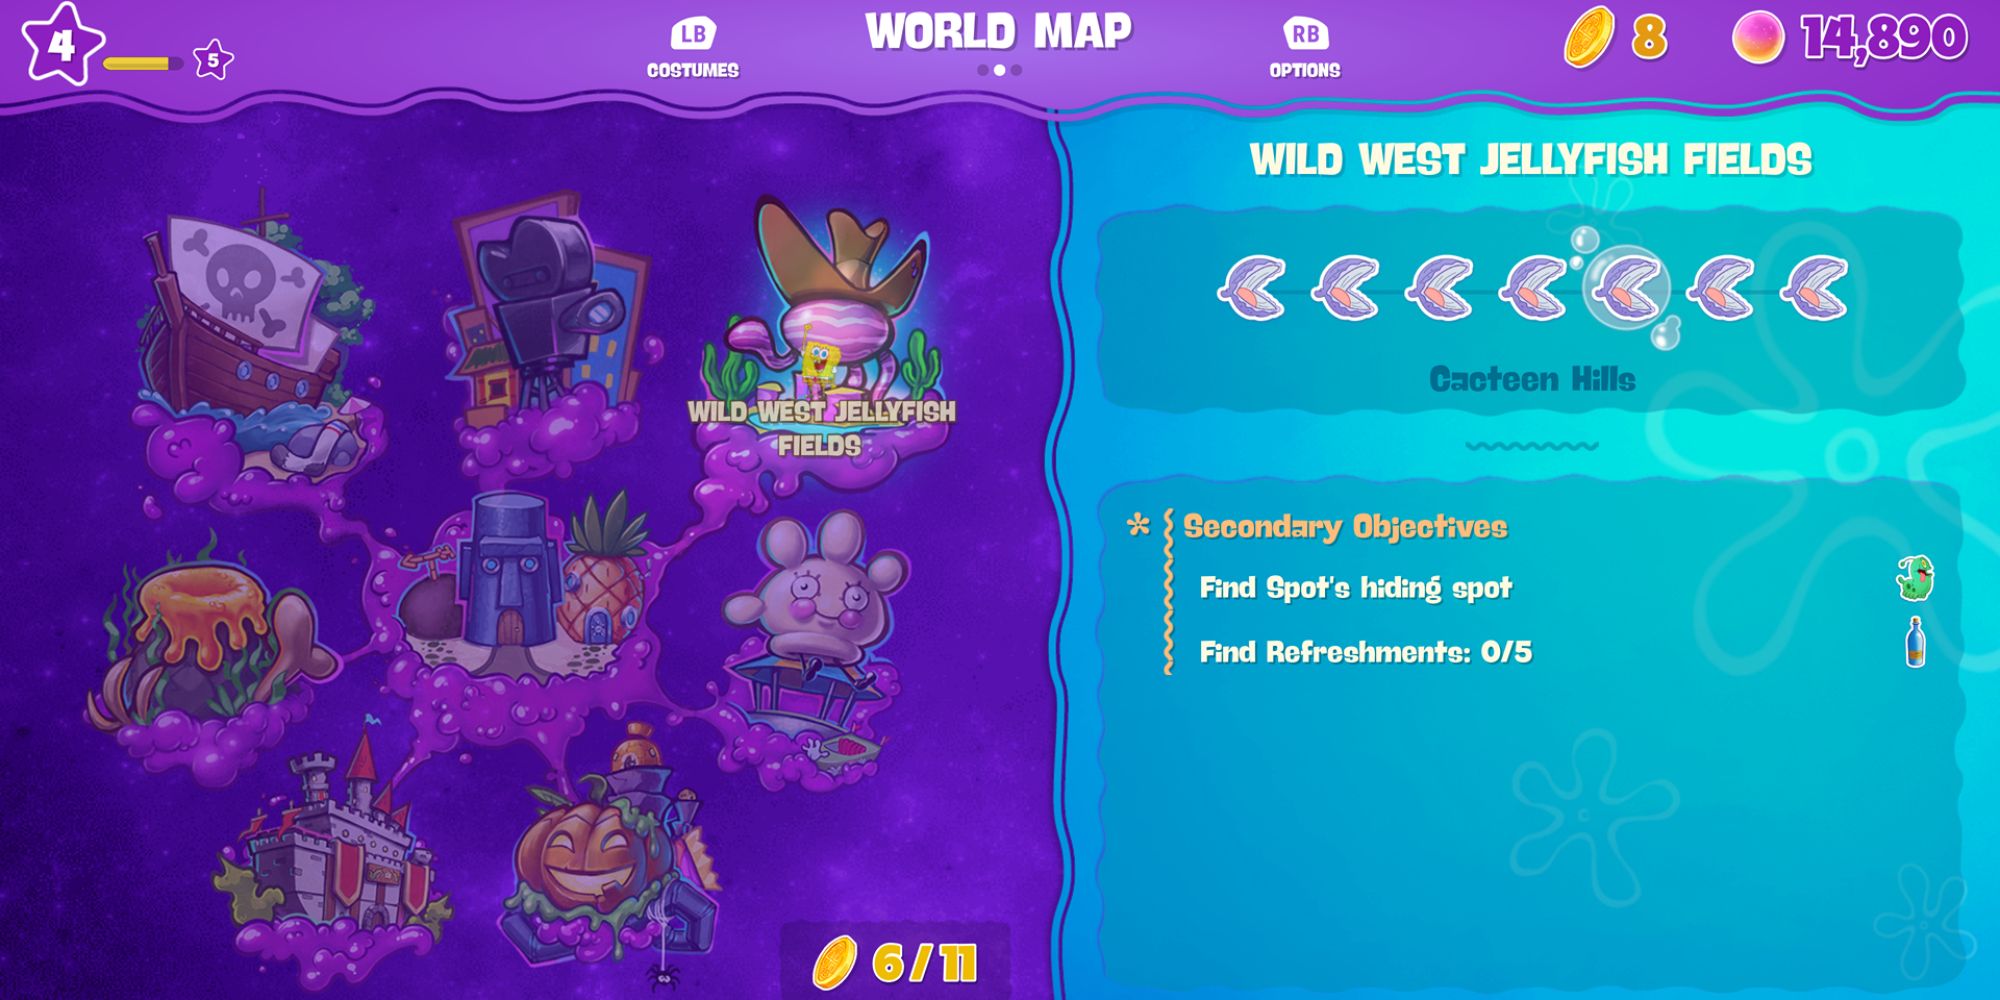 SpongeBob Cosmic Shake Screenshot Of Wild West Jellyfish Fields Checkpoints With Cacteen Hills Highlighted